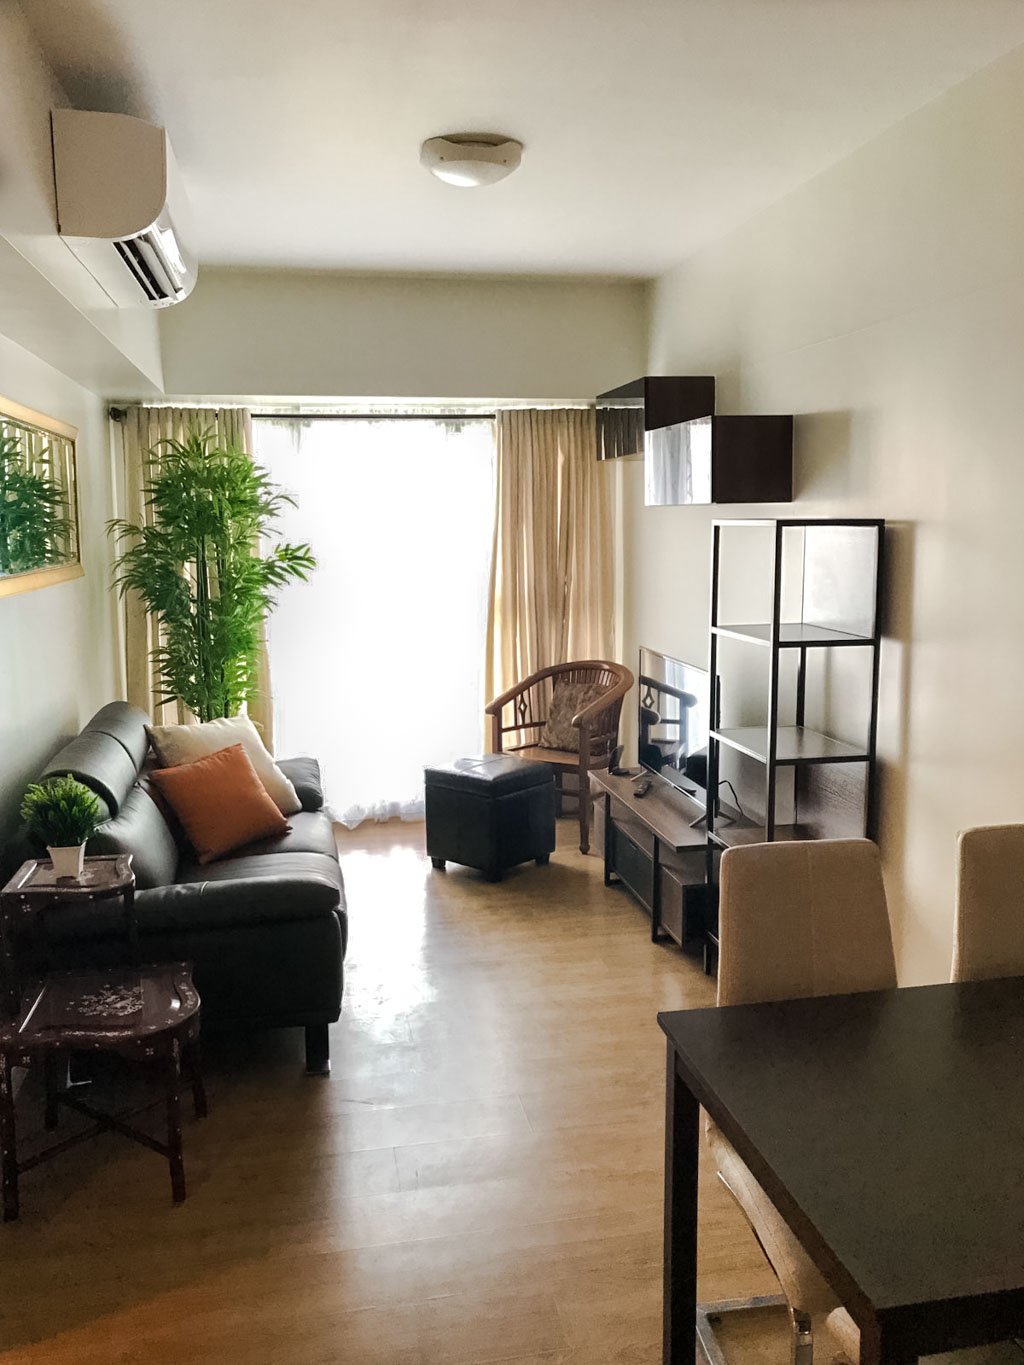 RCS33 Furnished 2 Bedroom Condo for Rent in Solinea - Cebu Grand Realty (1)